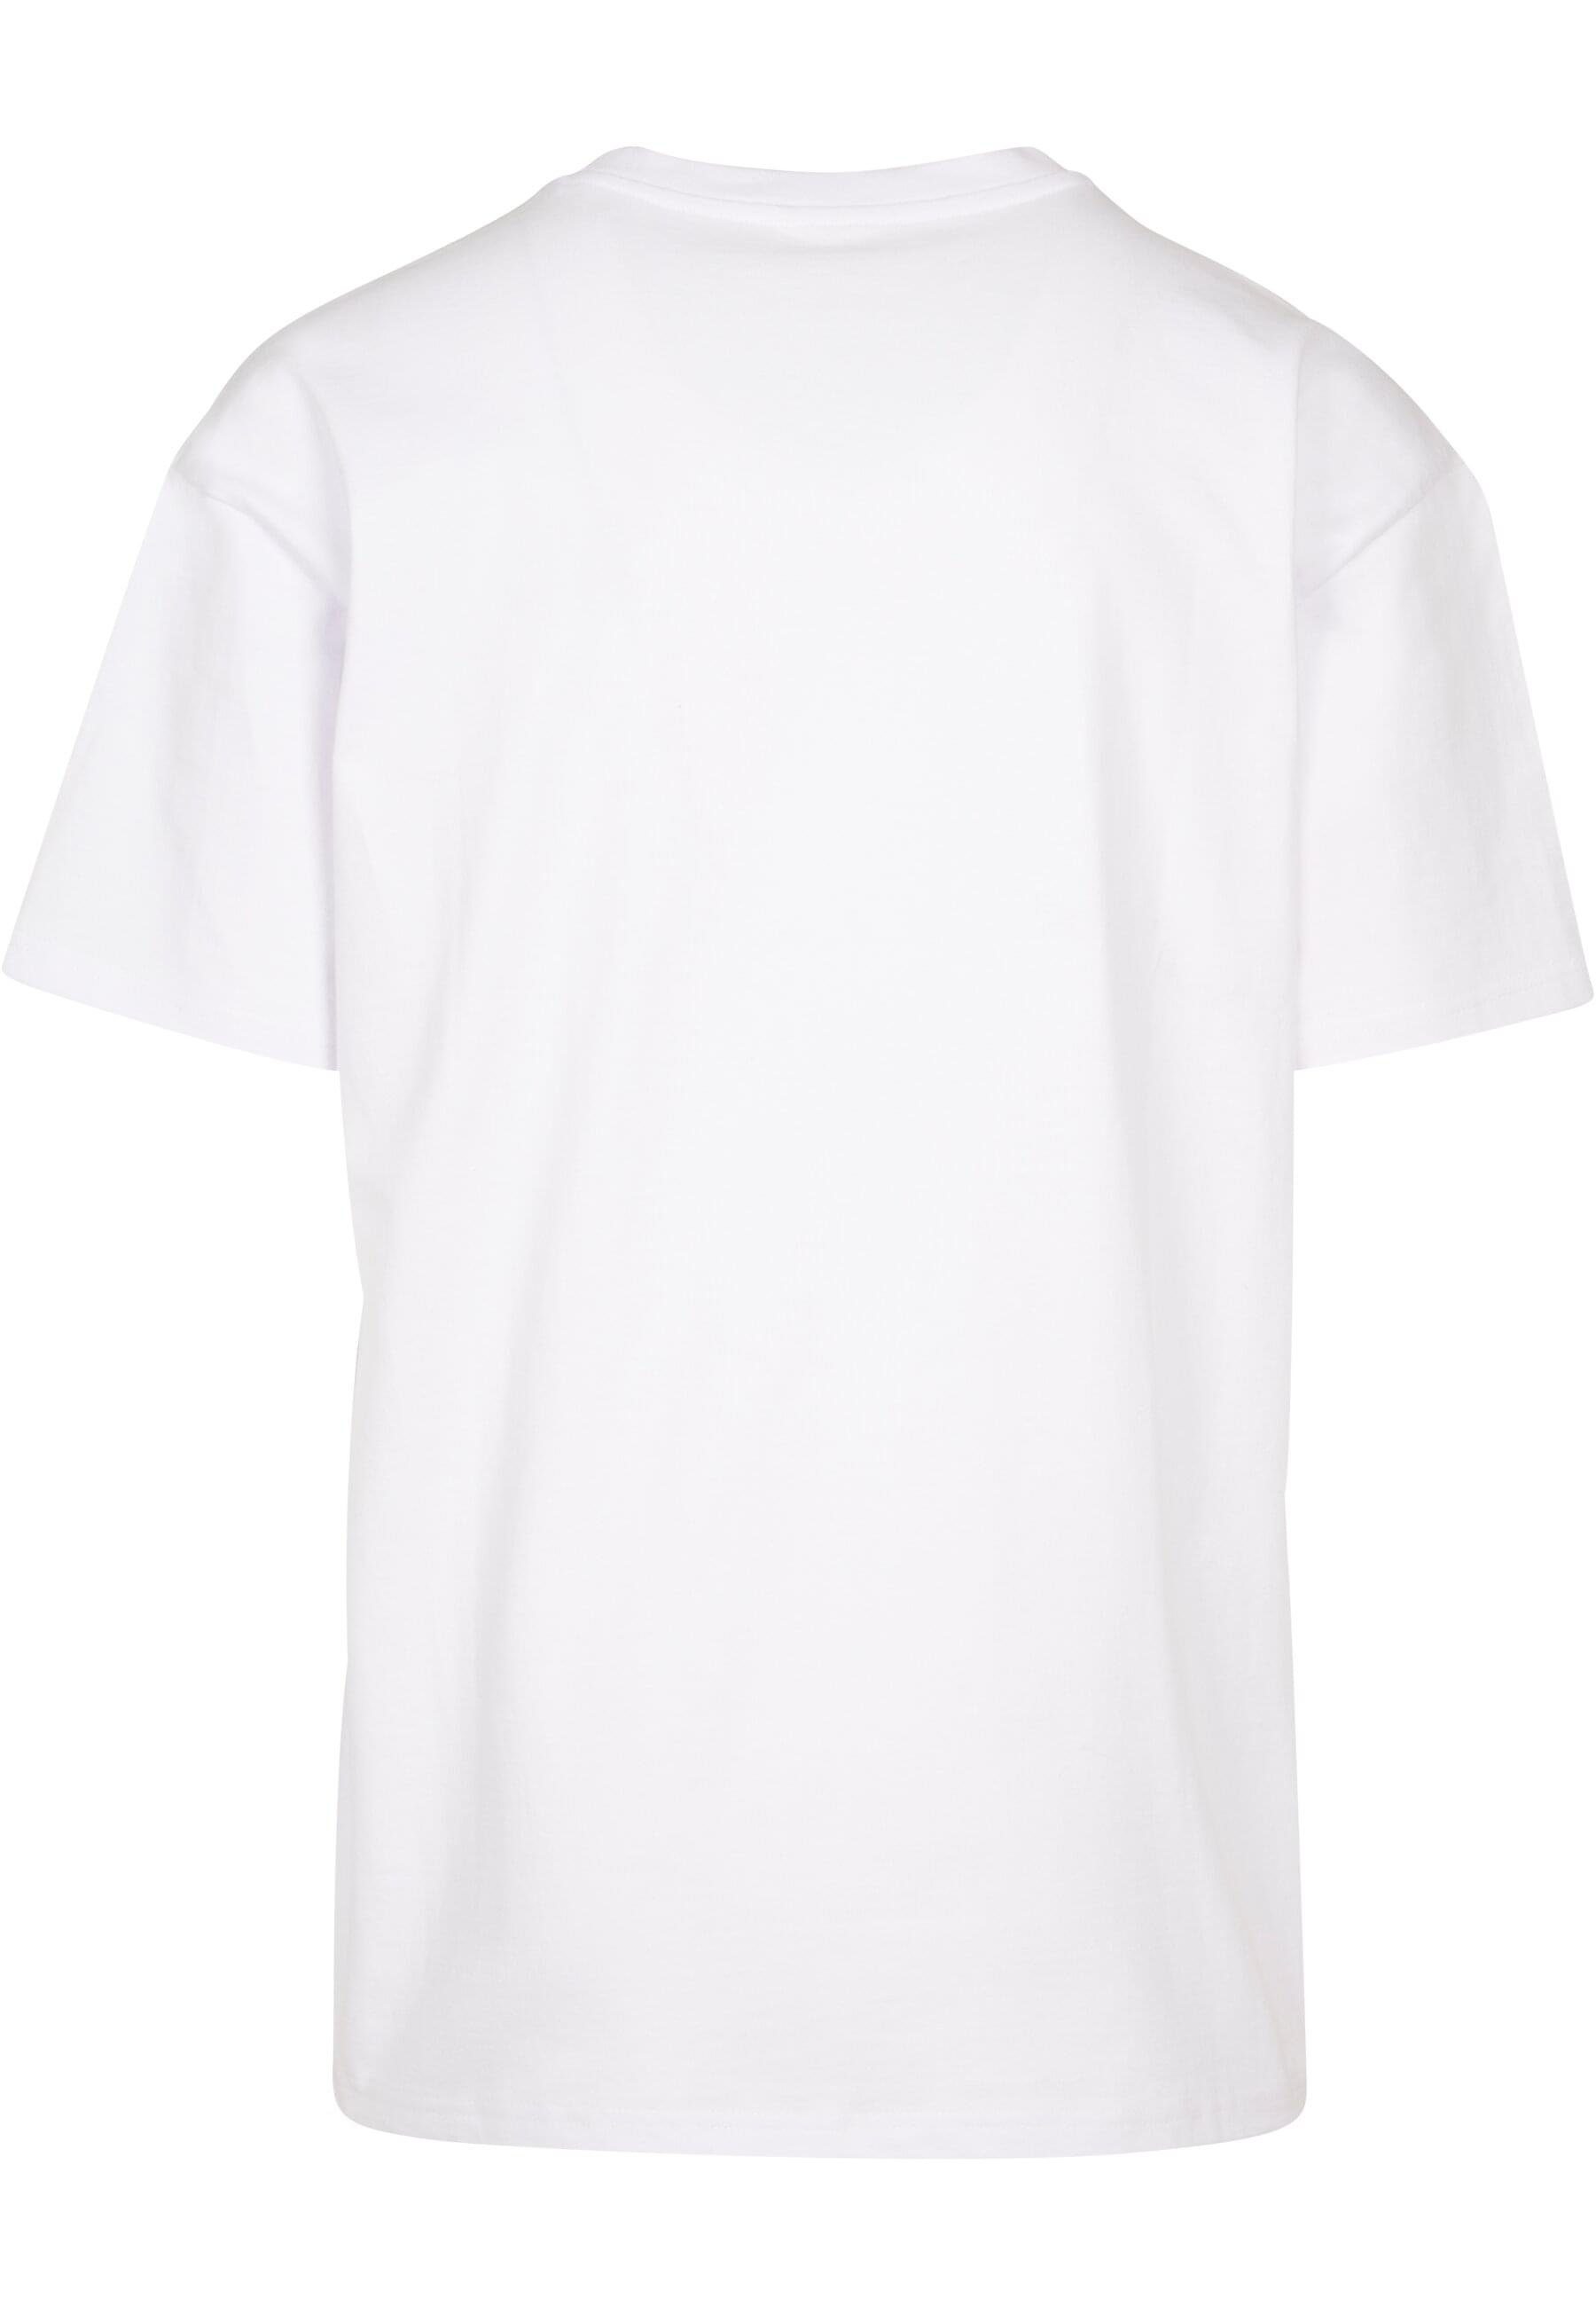 T-Shirt white Oversize fly Tee by (1-tlg) to Mister Tee Ready Unisex Upscale